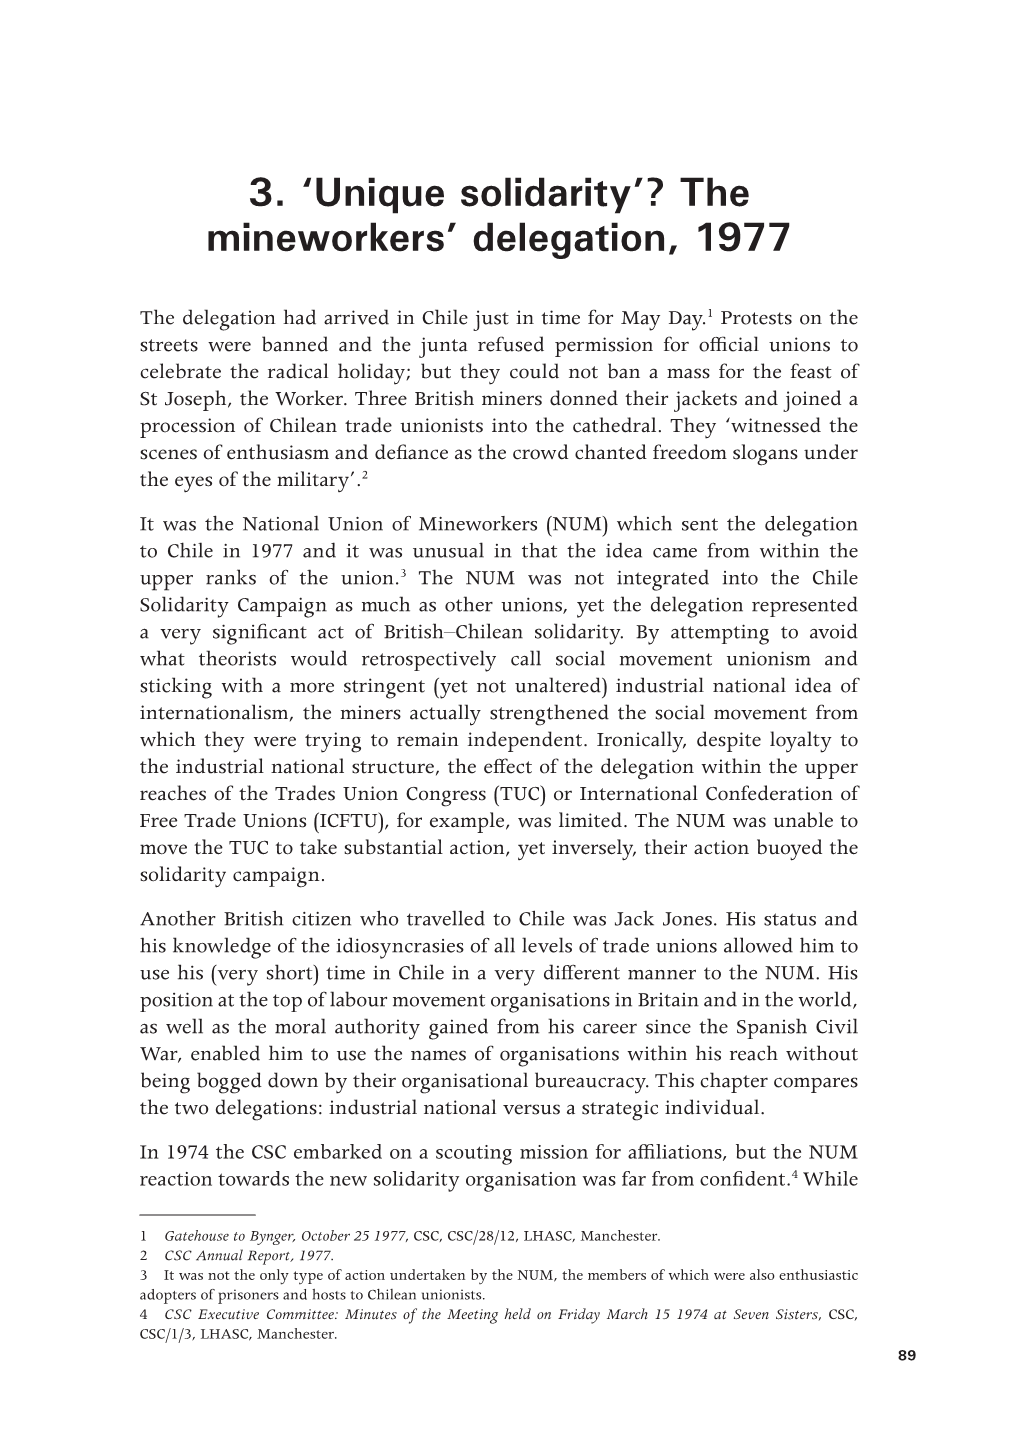 'Unique Solidarity'? the Mineworkers' Delegation, 1977